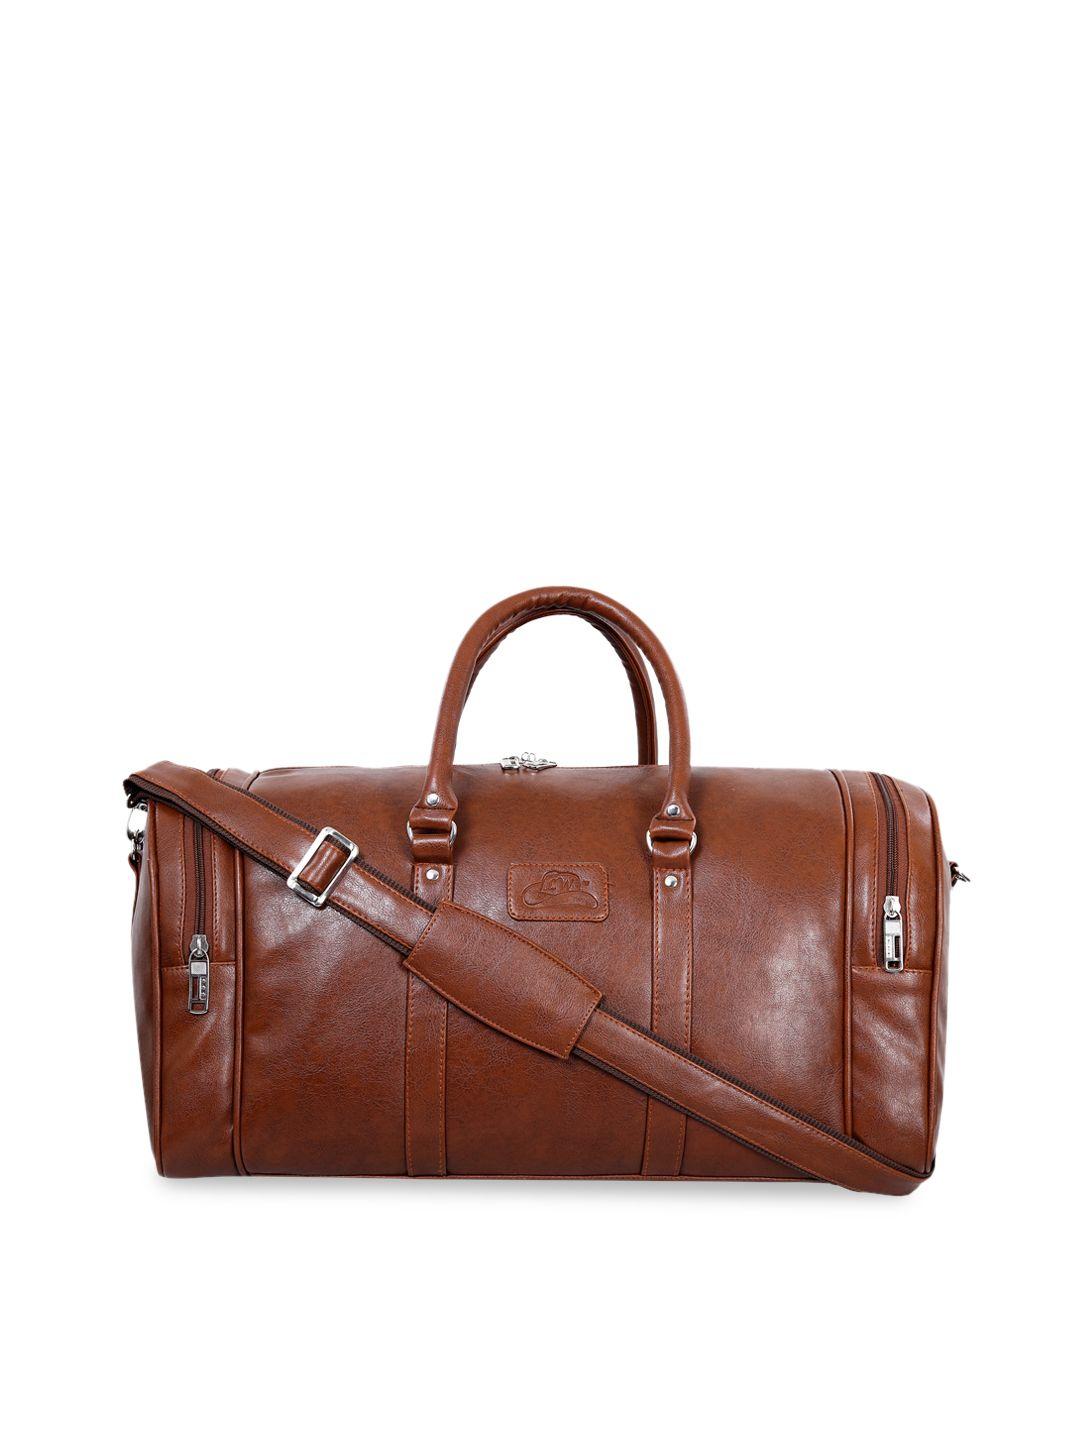 leather world unisex tan brown solid large duffel bag